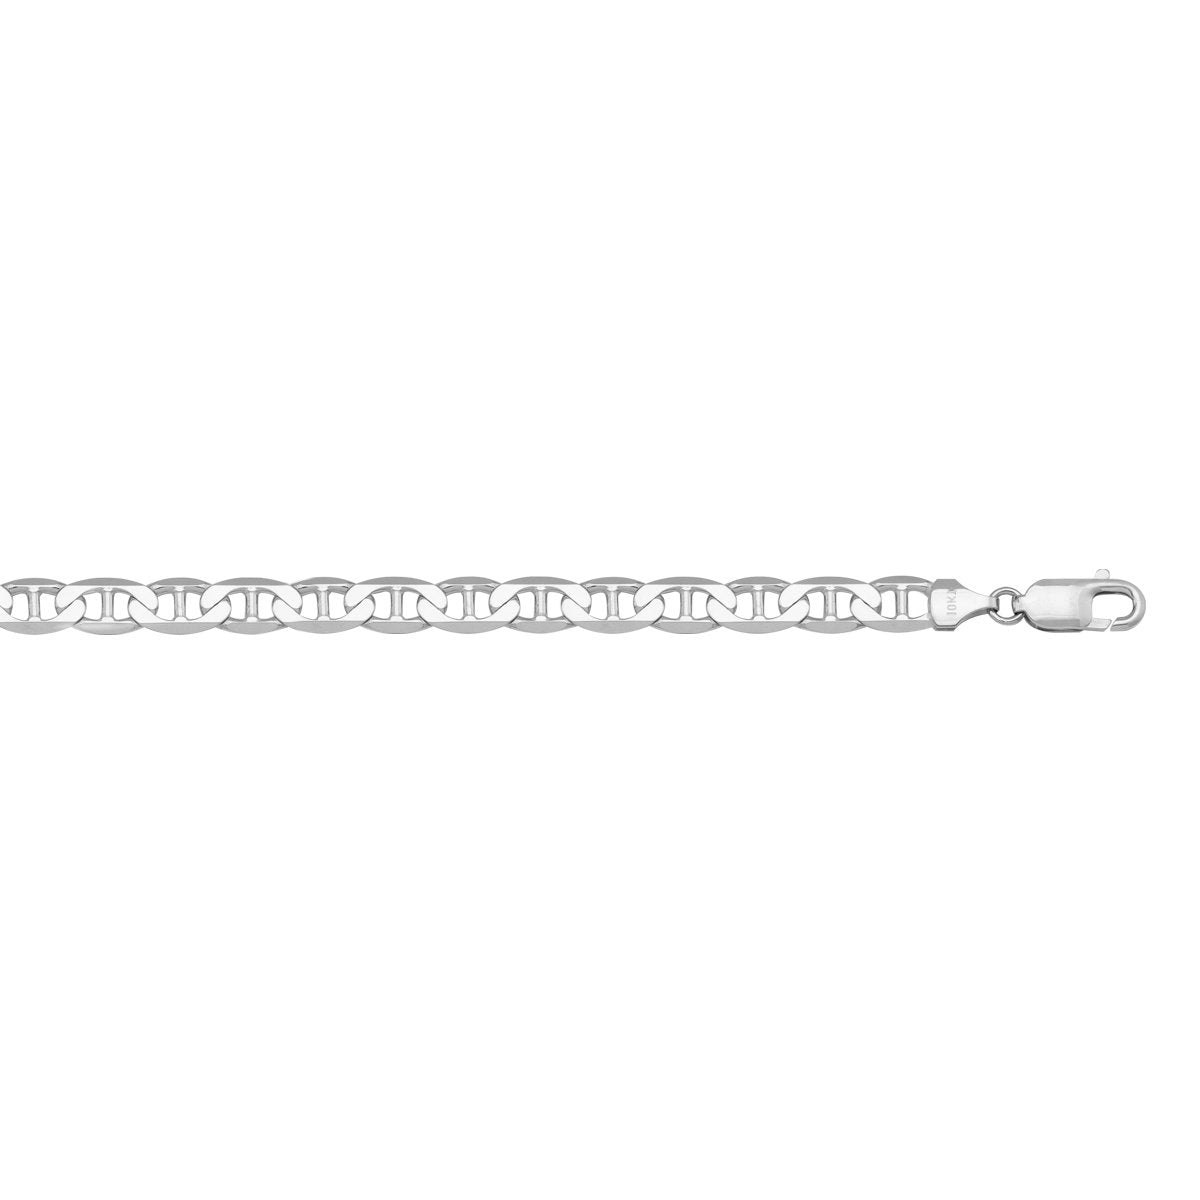 GOLD CHAIN WHITE GOLD SOLID FLAT ANCHOR LINK (LOBSTER CLASP) 